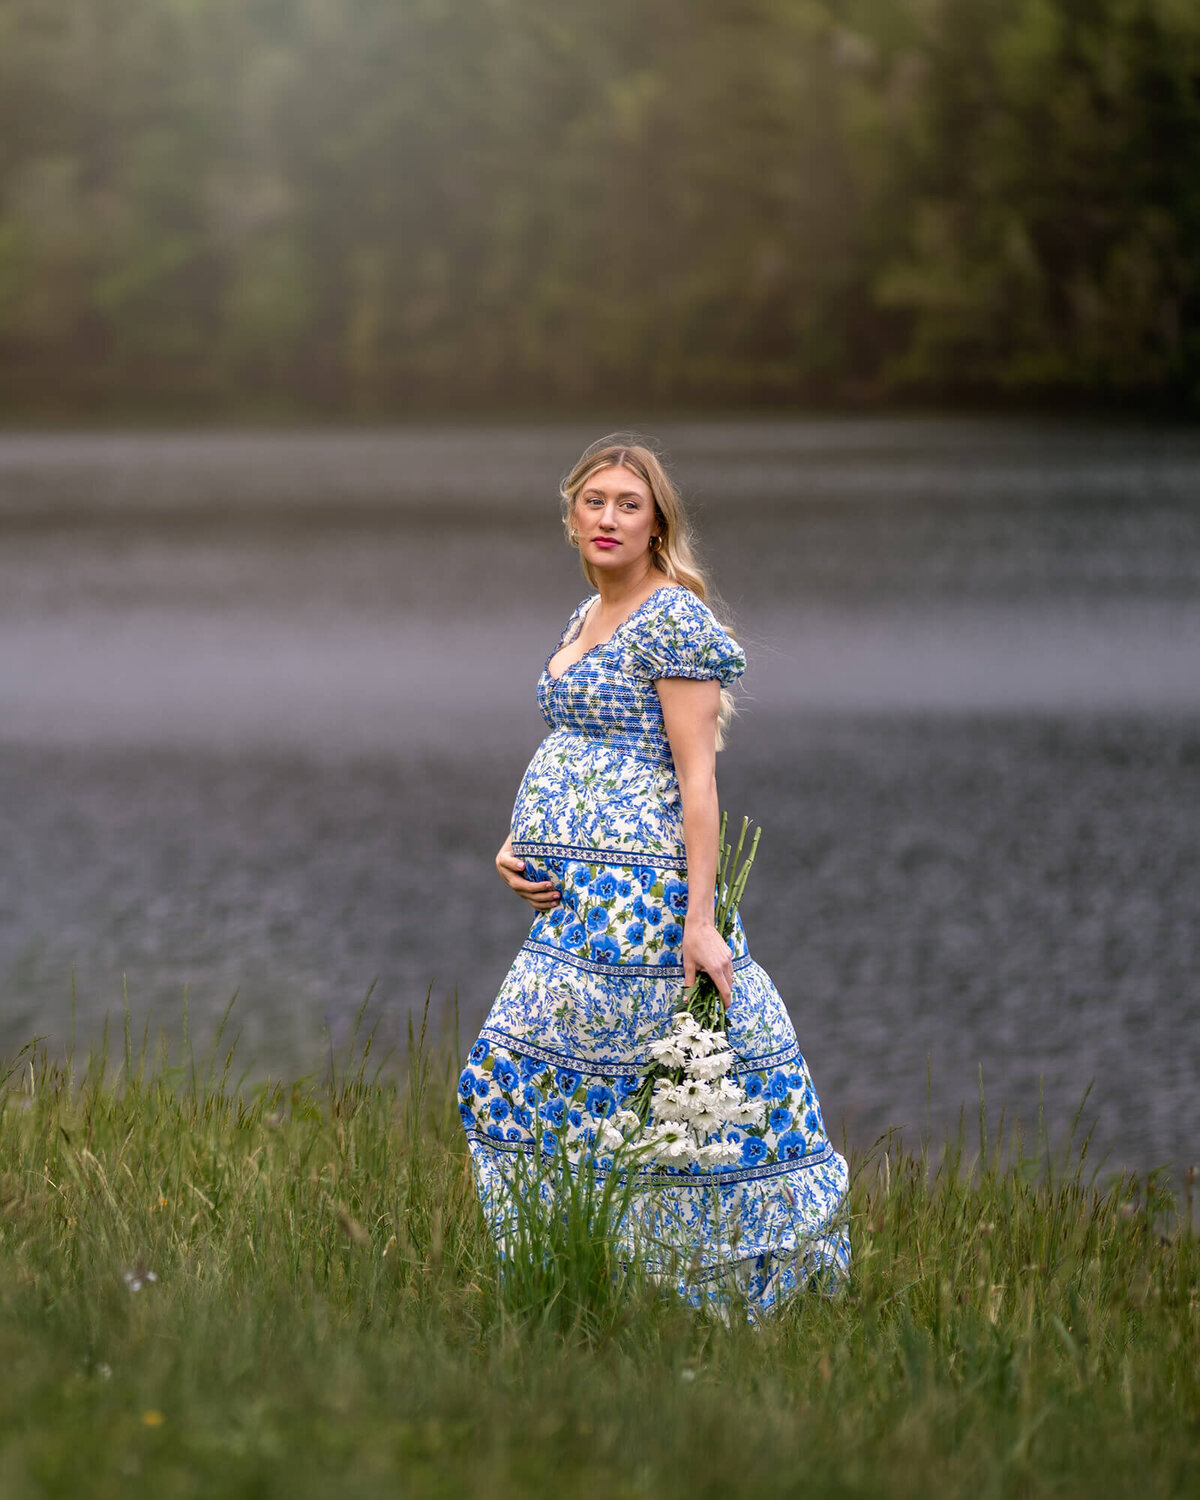 A gorgeous, young mama to be cradles her bump and holds flowers while standing in the grass by Fairfield Lake near Asheville